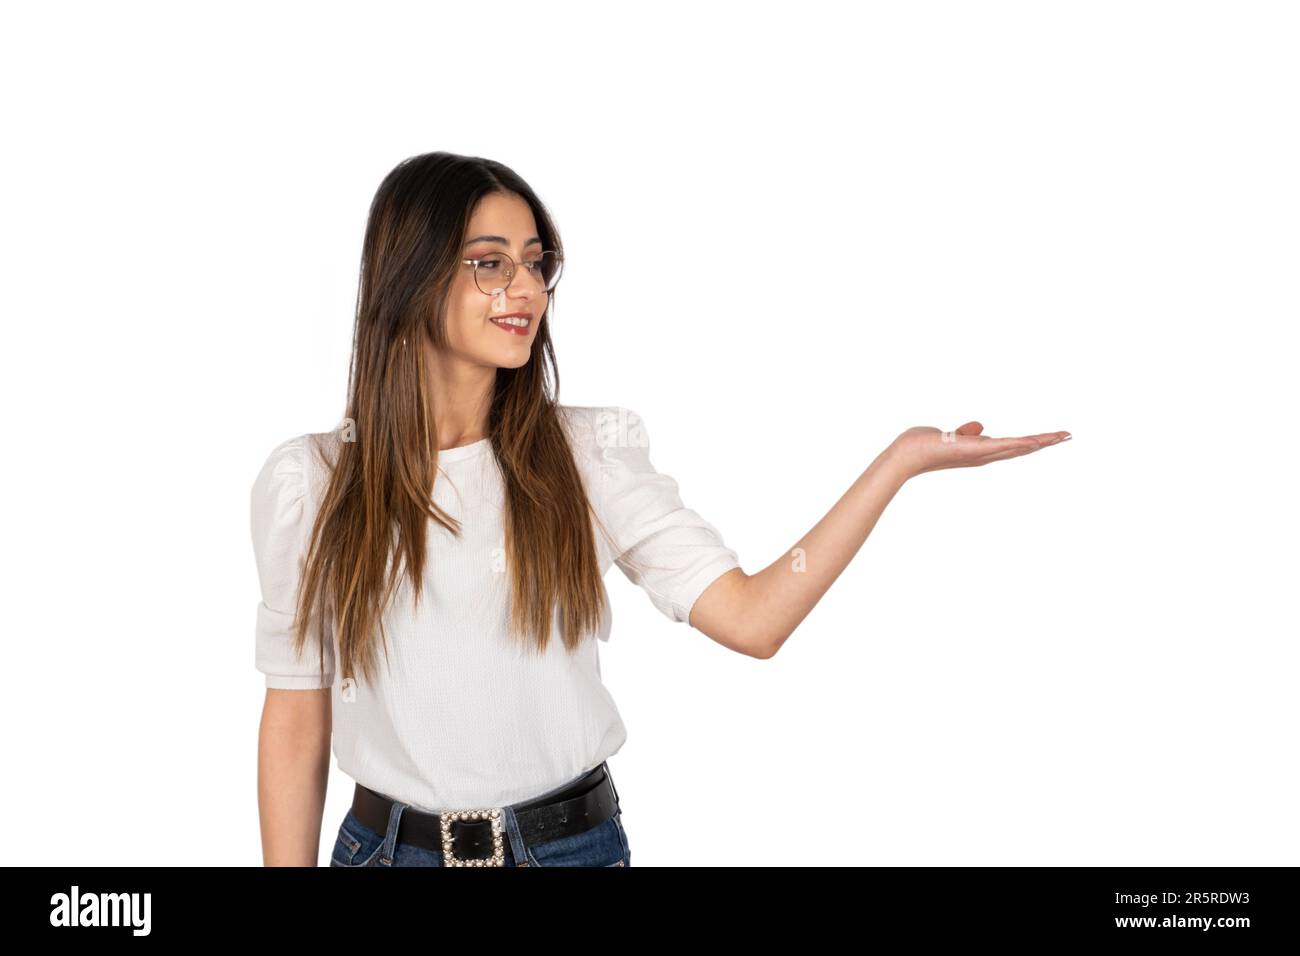 Young brunette  woman looking her open hand palm, holding imaginary product object. Advertising concept idea image, isolated copy space. Stock Photo